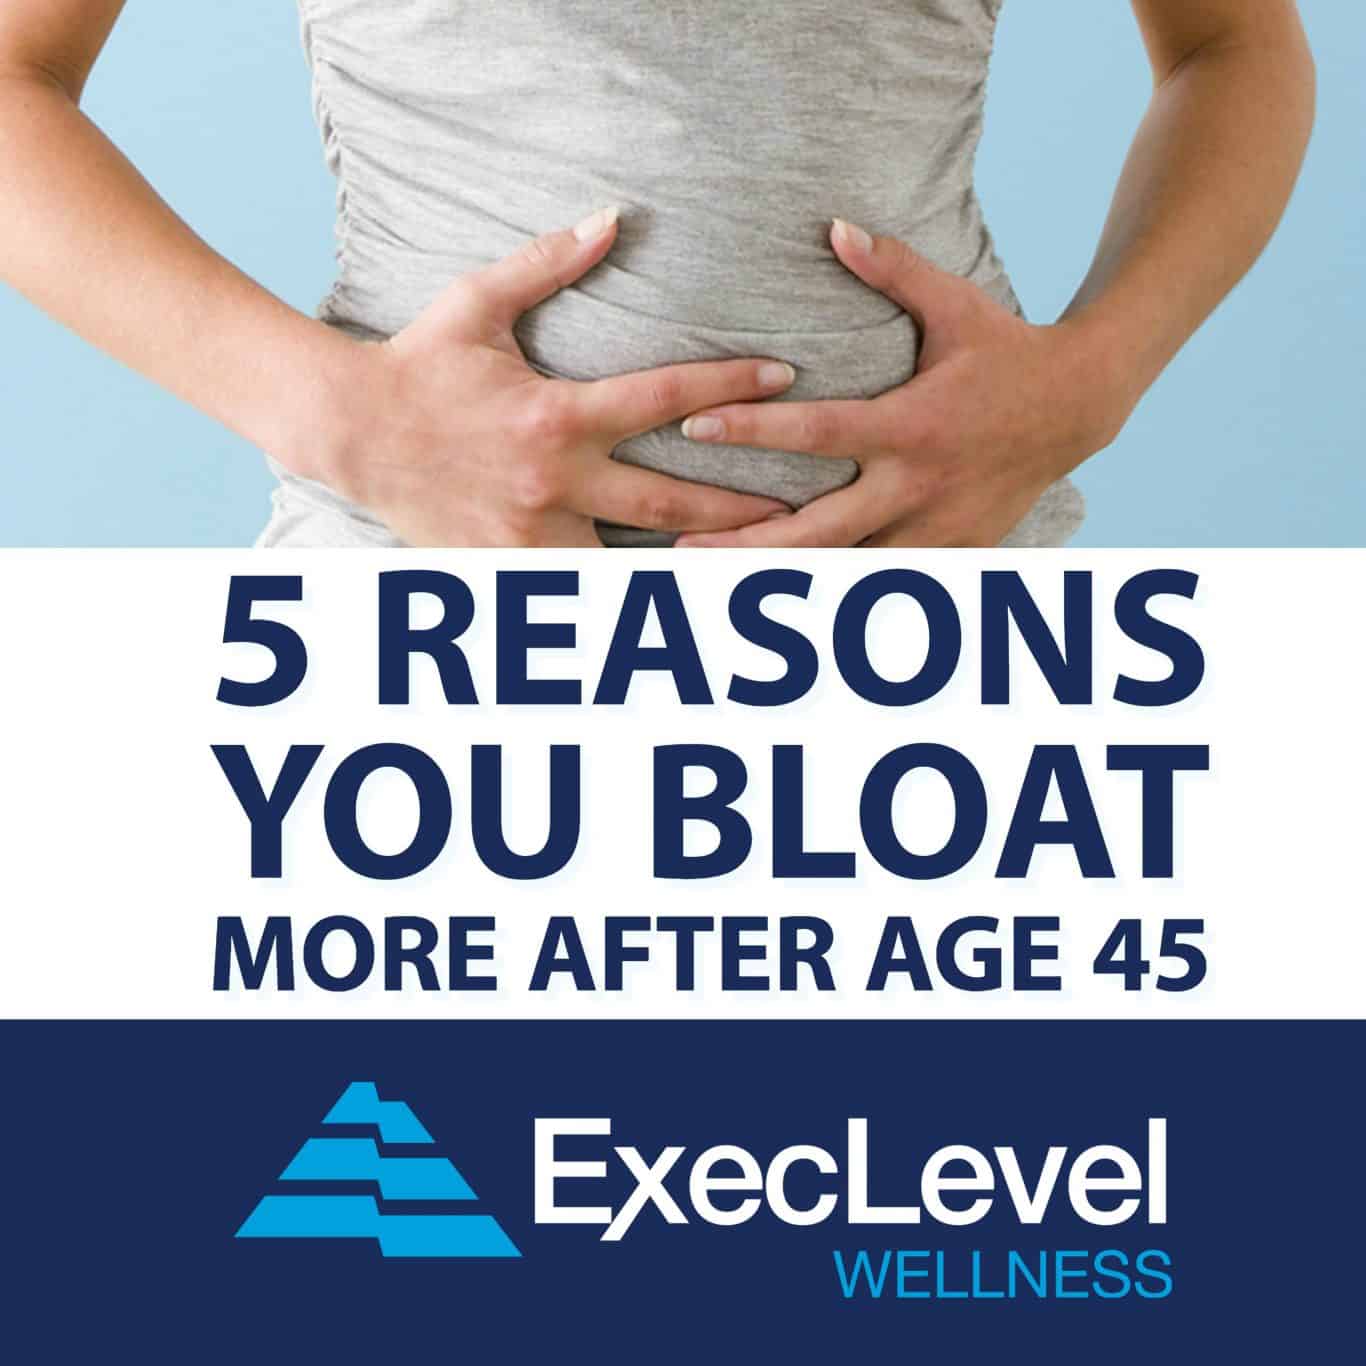 5 Reasons You Bloat More After Age 45